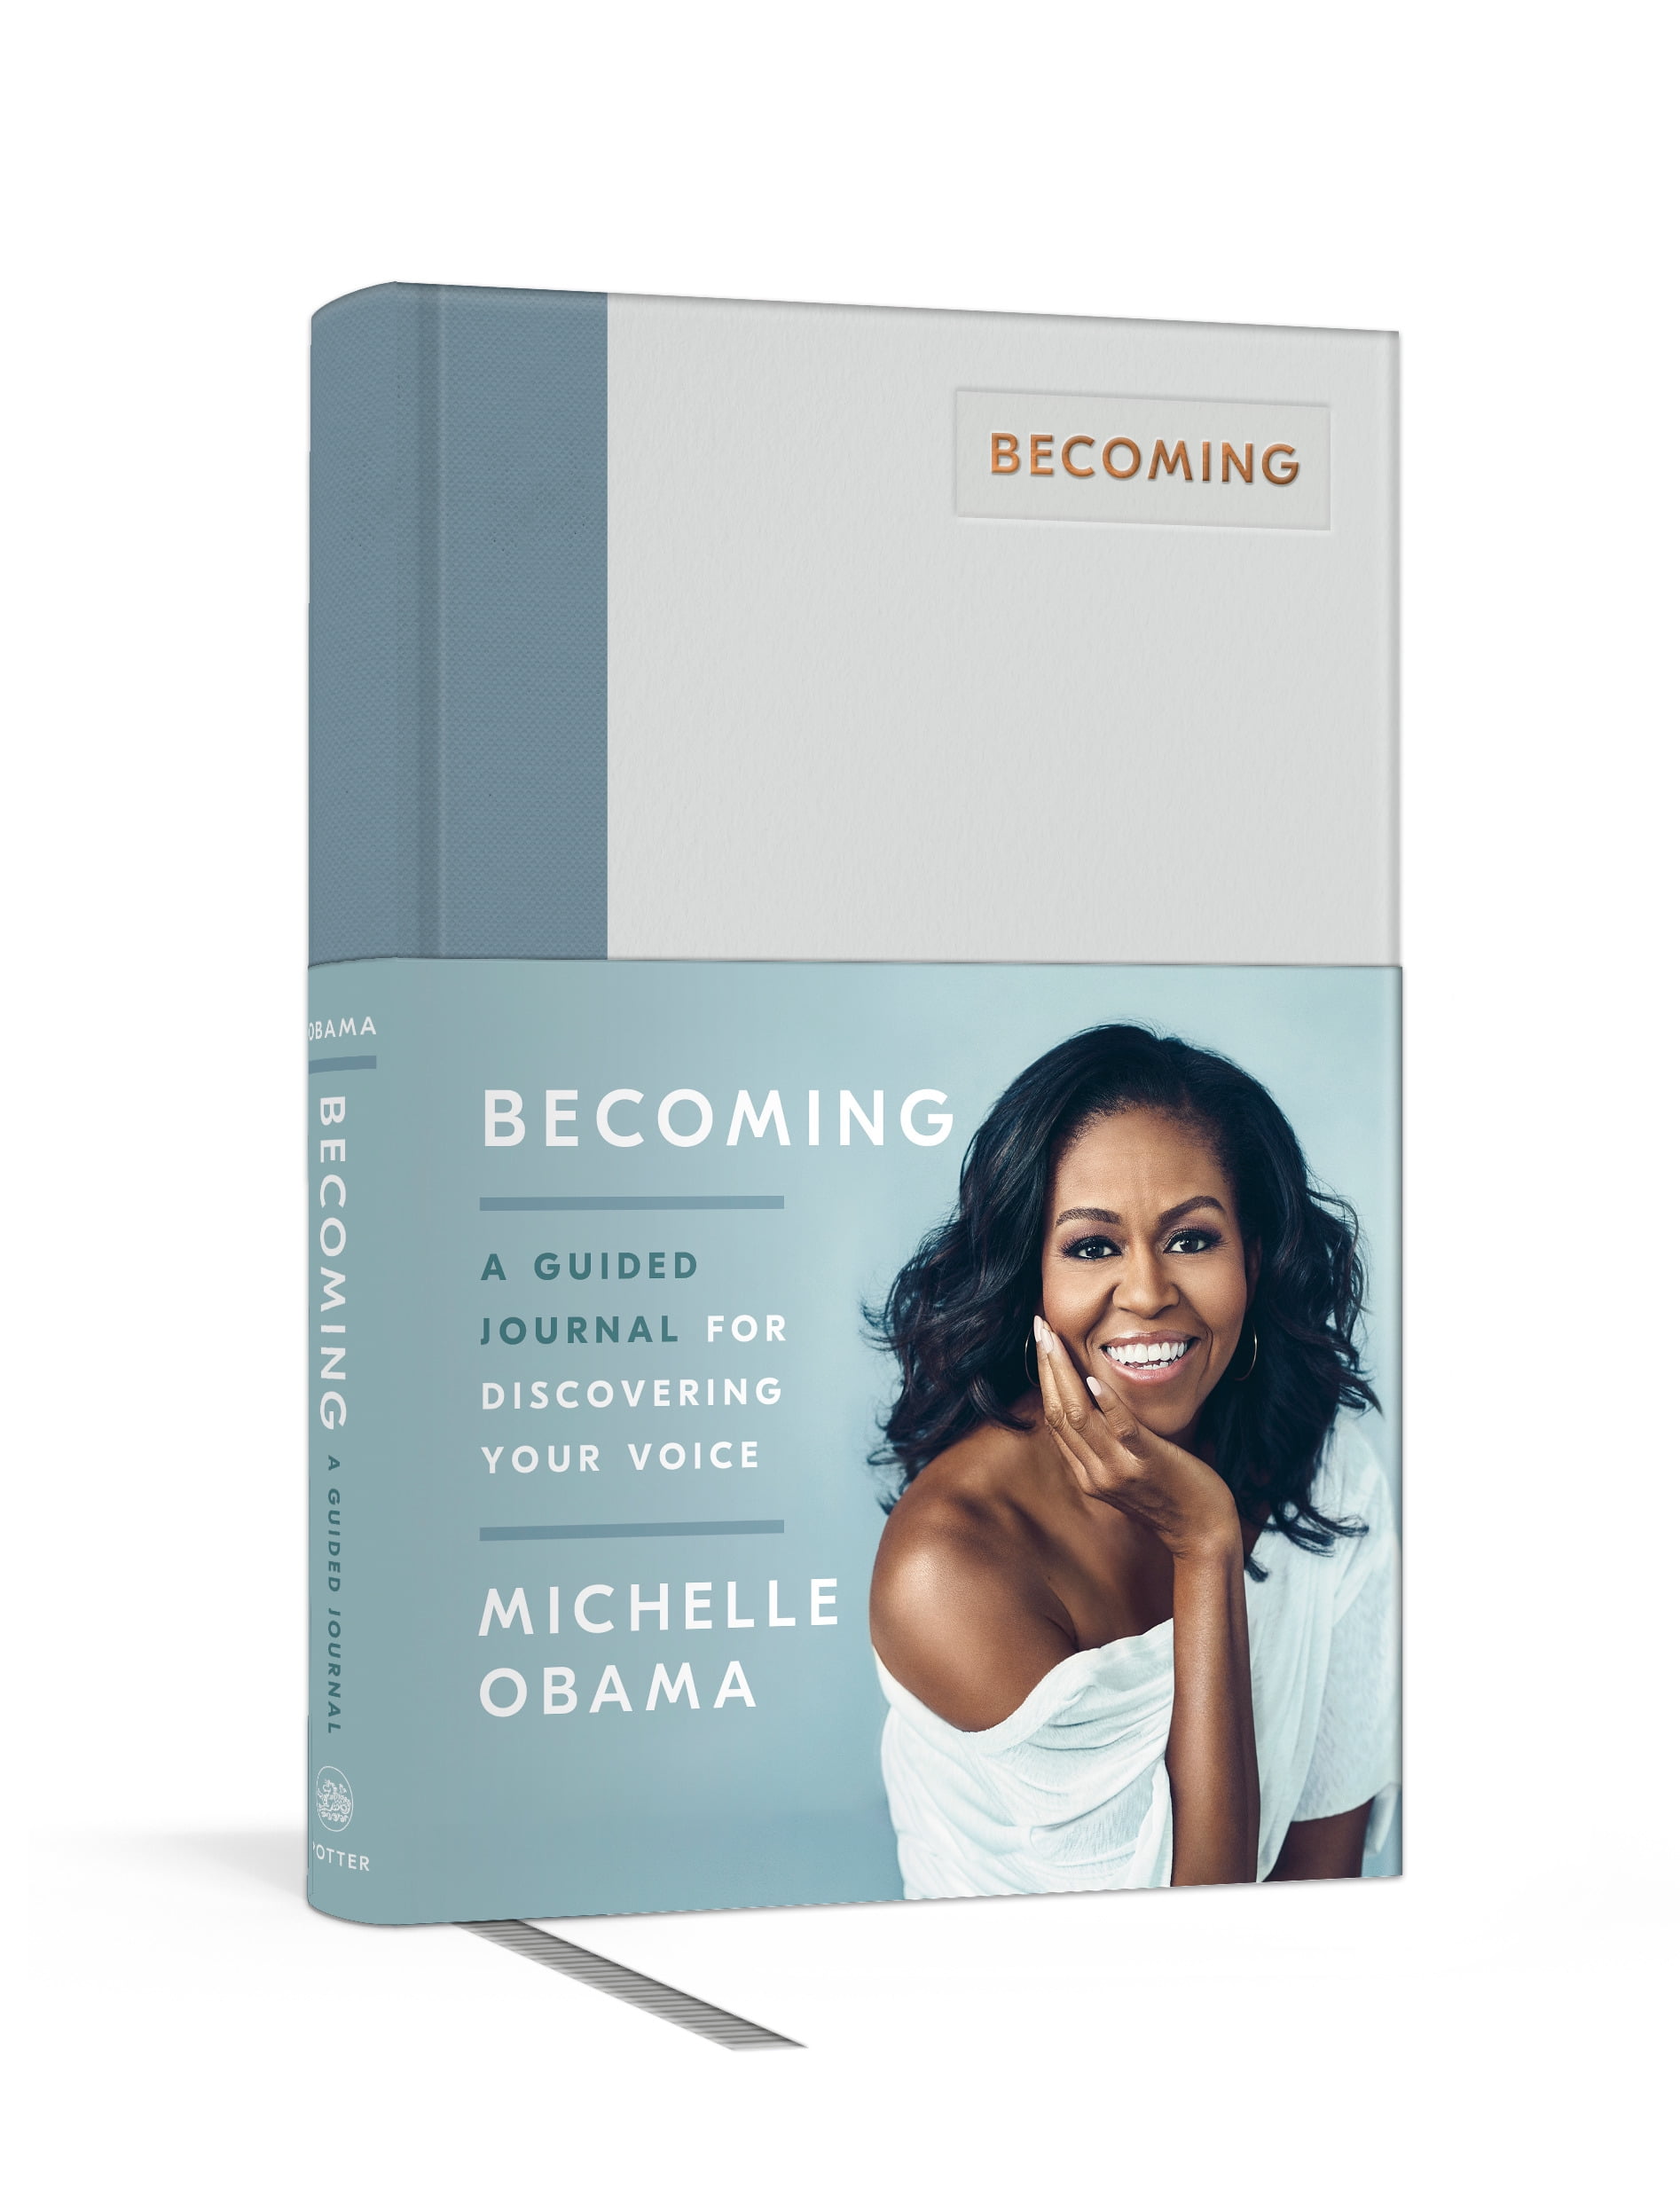 Michelle Obama Becoming: A Guided Journal for Discovering Your Voice